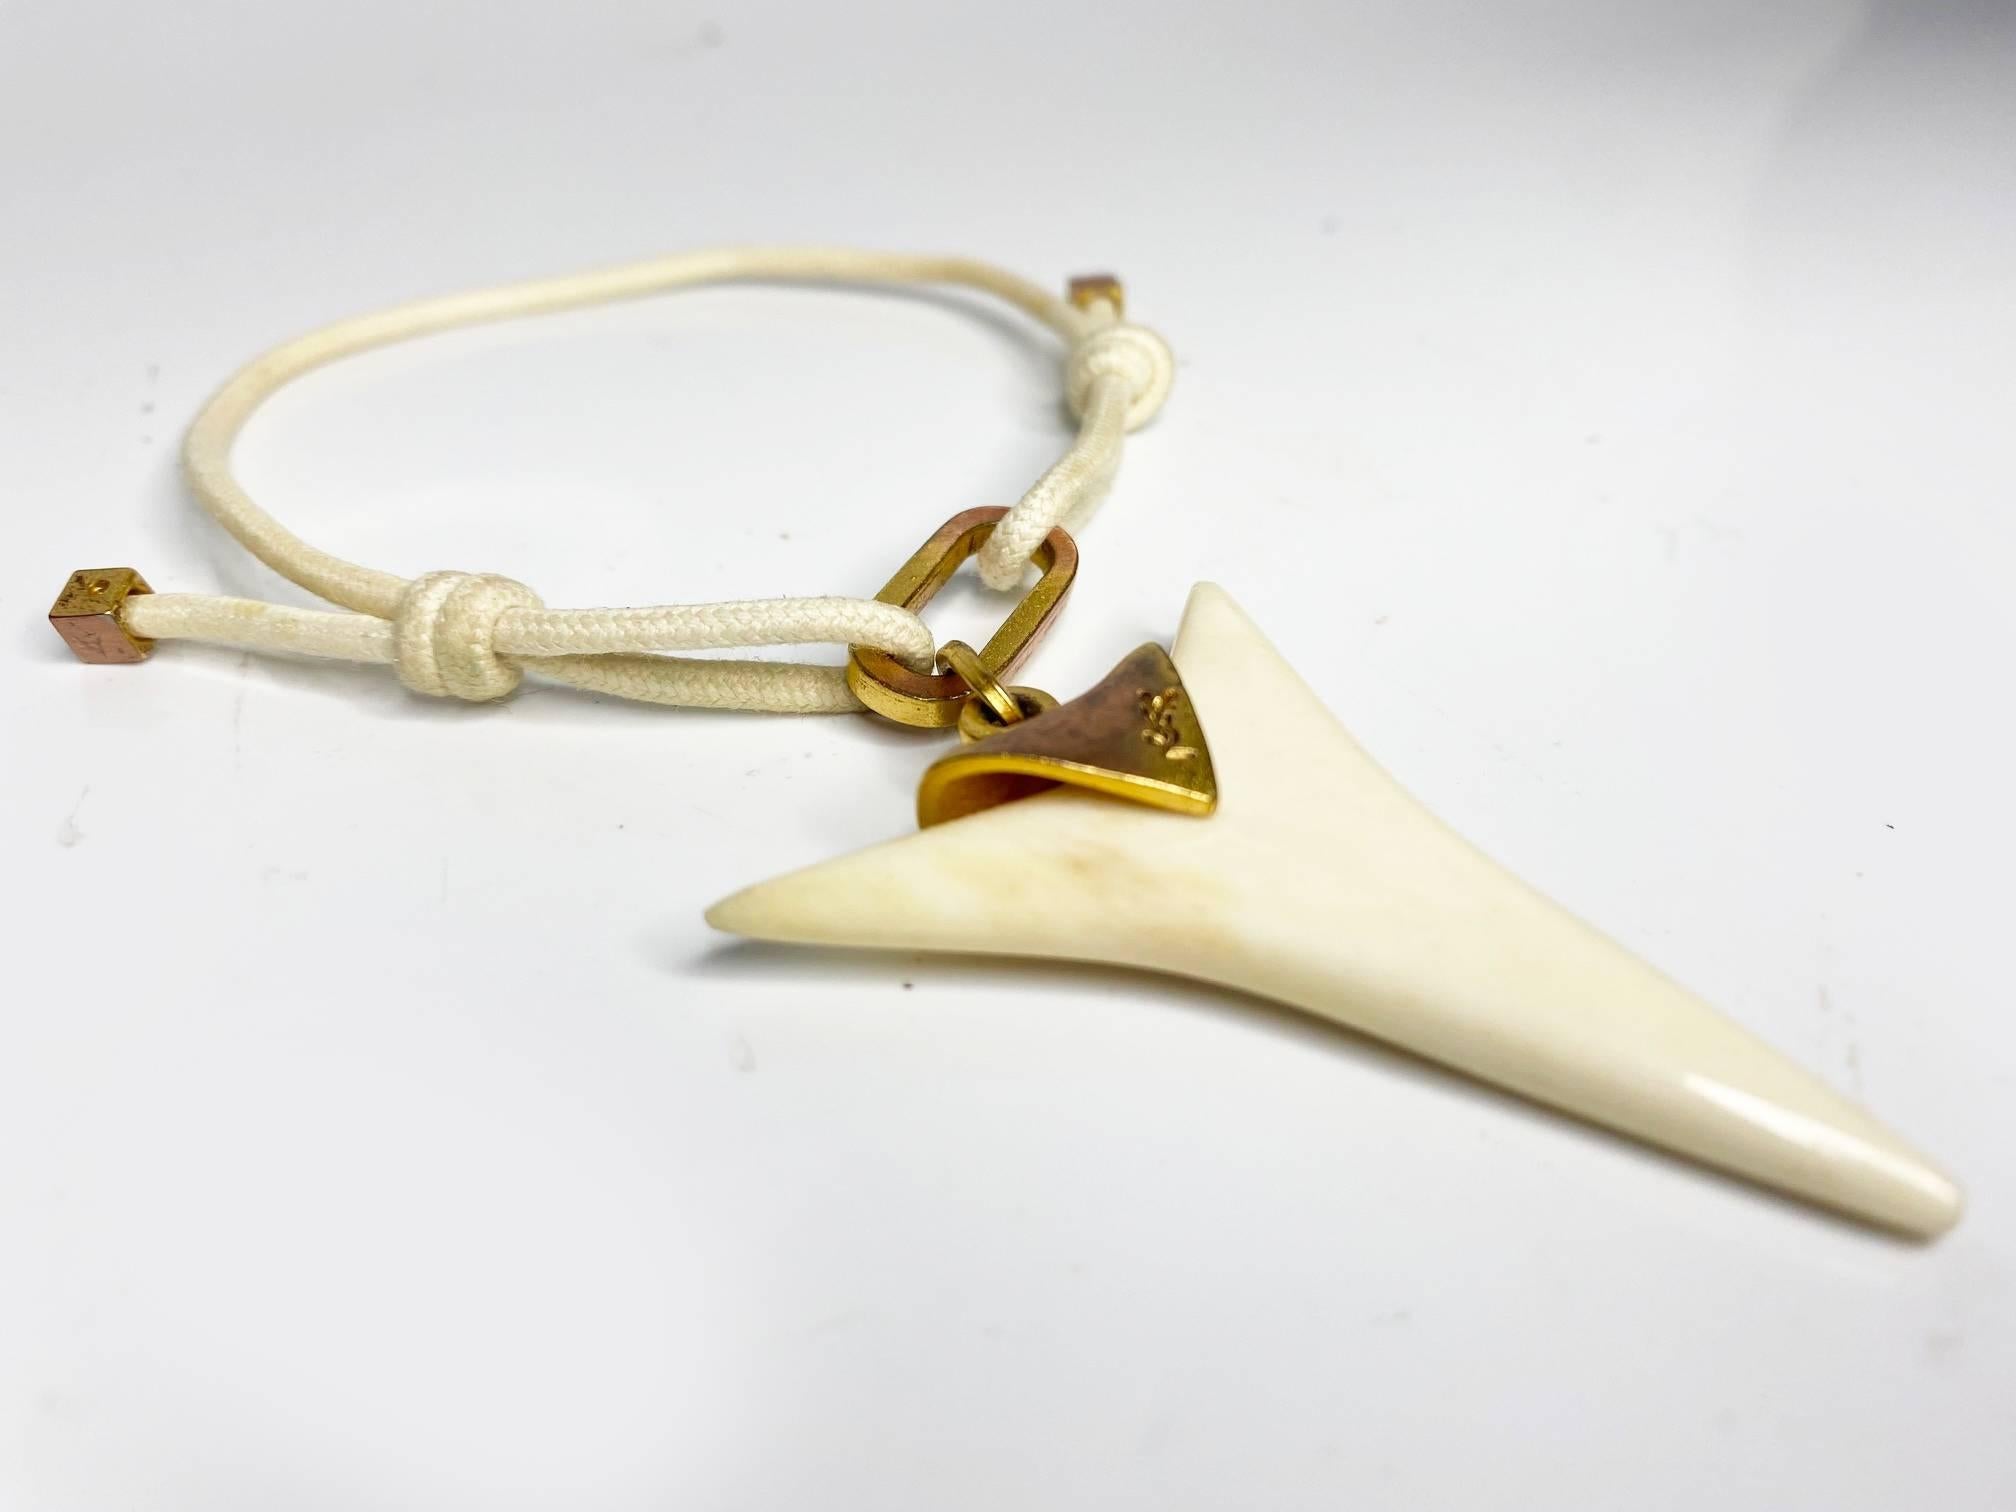 Yves Saint Laurent bracelet, shark shaped horn charm, logo on gold tone metalware, cream white cord bracelet. Made with a signature logo, this bracelet is sure to be a statement piece. Its luxurious and eye-catching materials bring a sense of